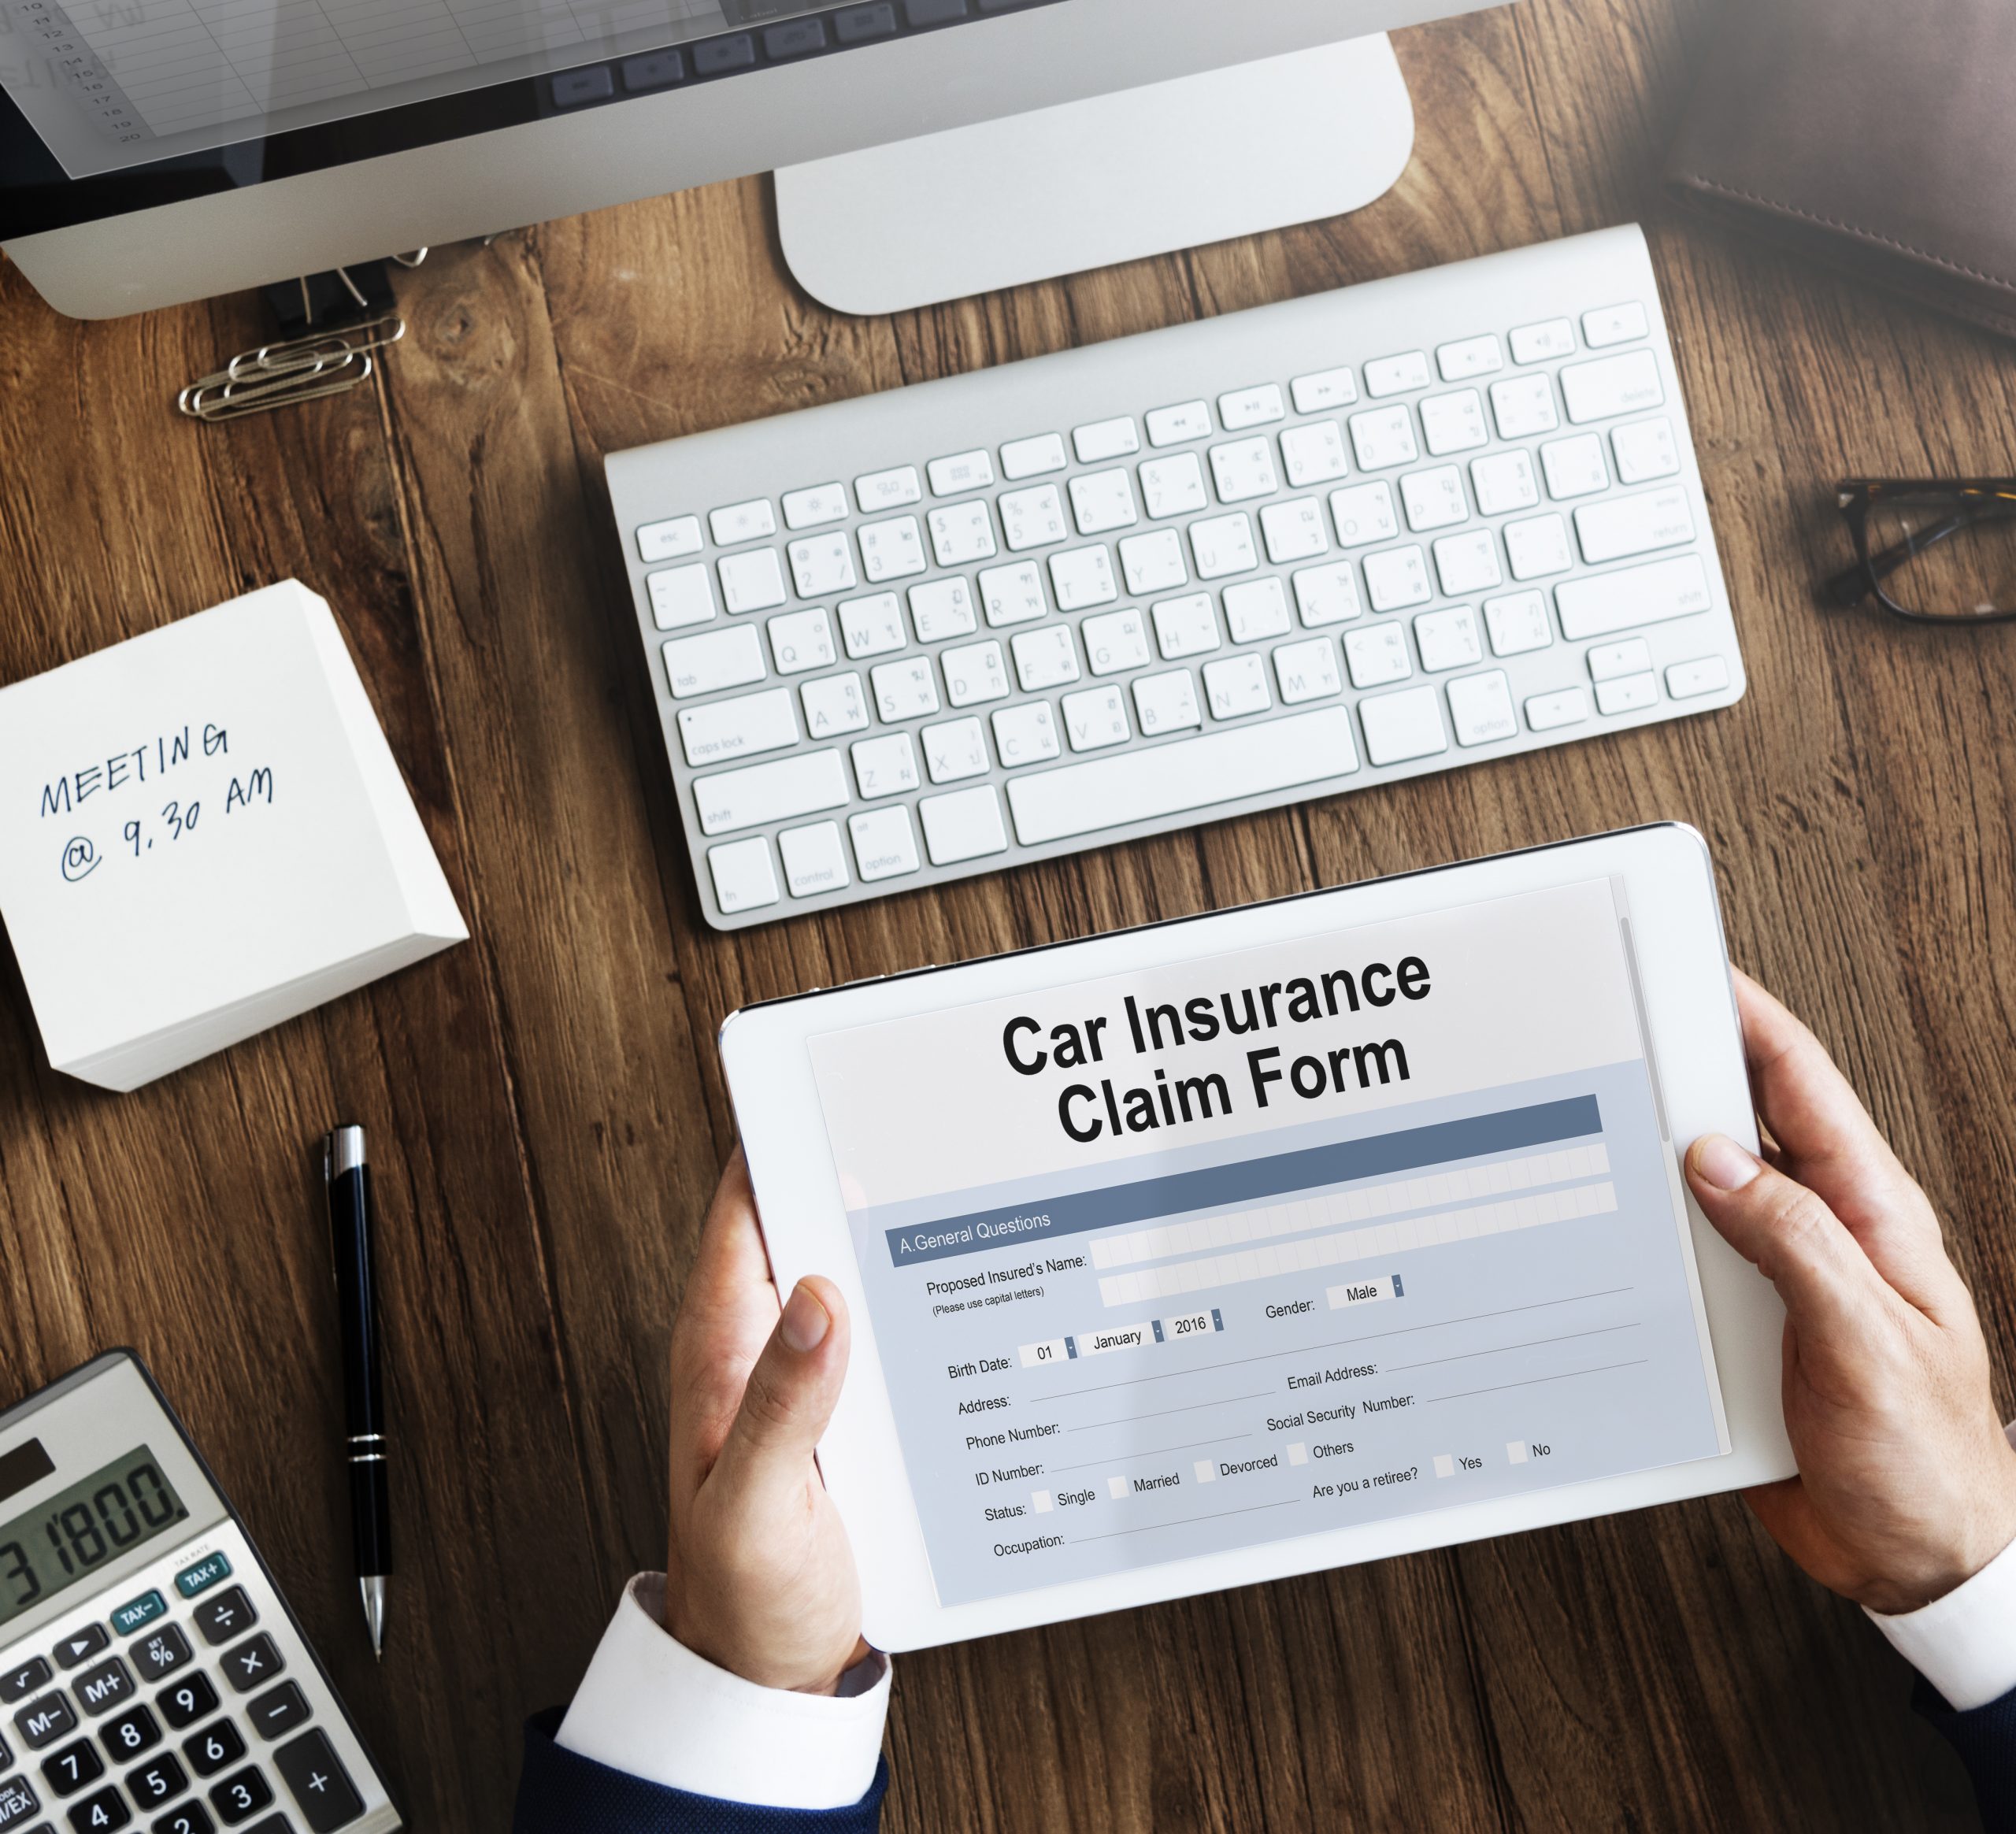 Changing Your Car Insurance Policy? Keep These Tips In Mind